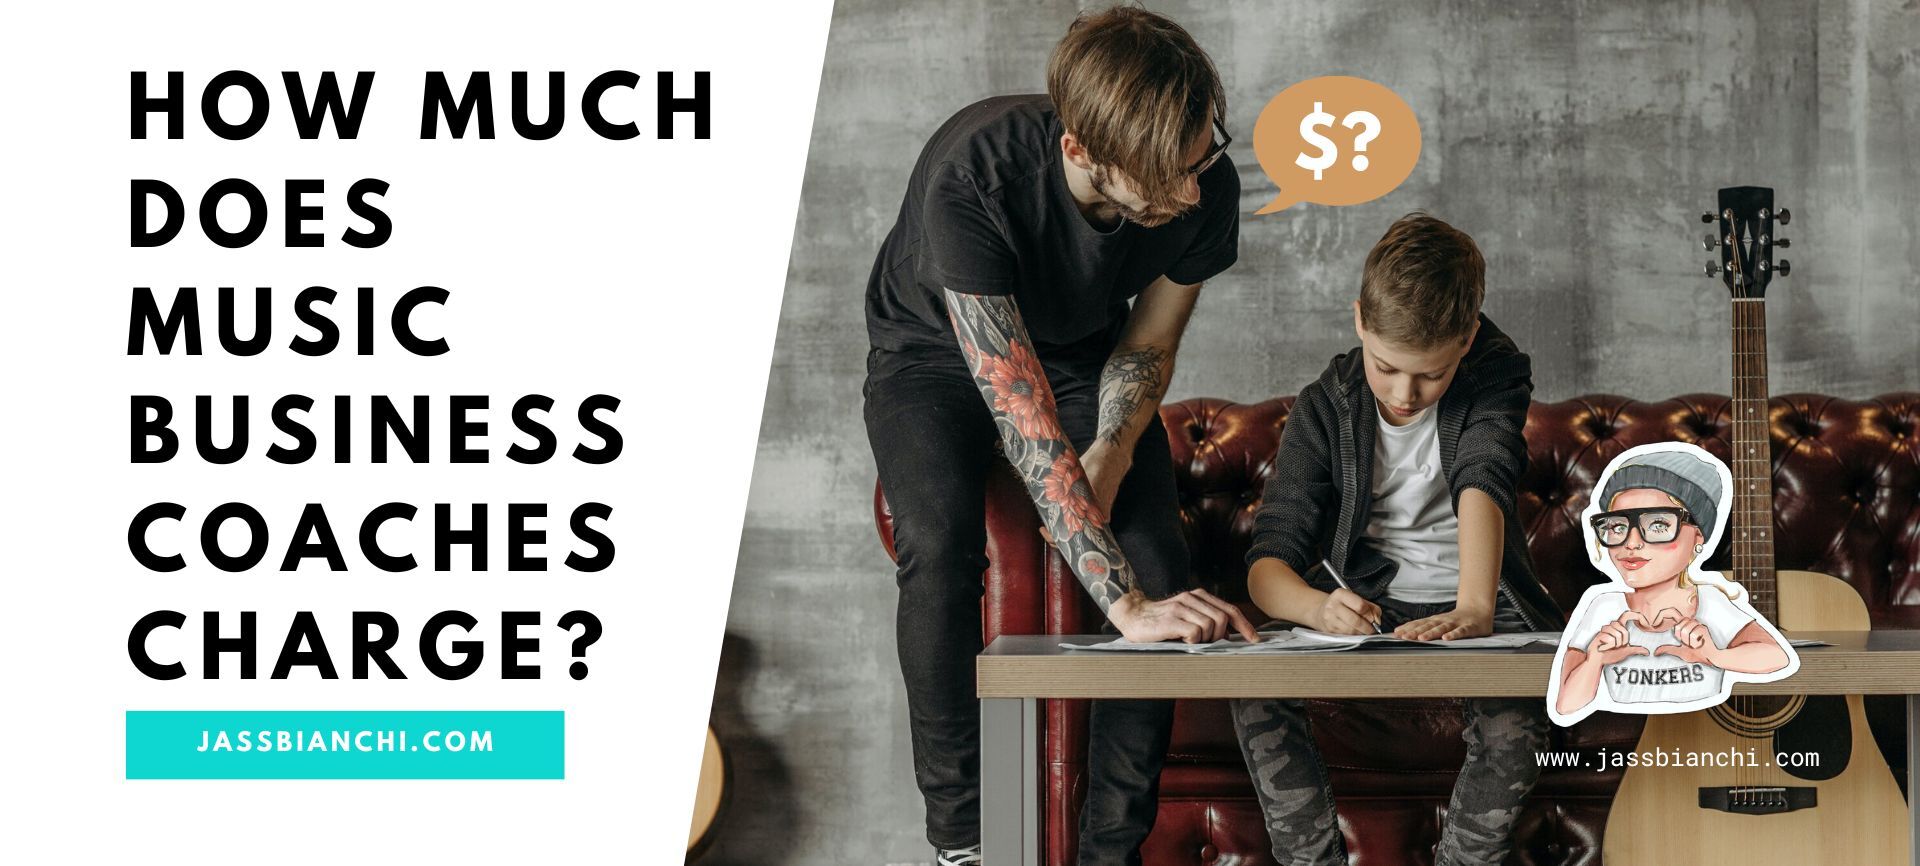 What is the cost of music business coach?